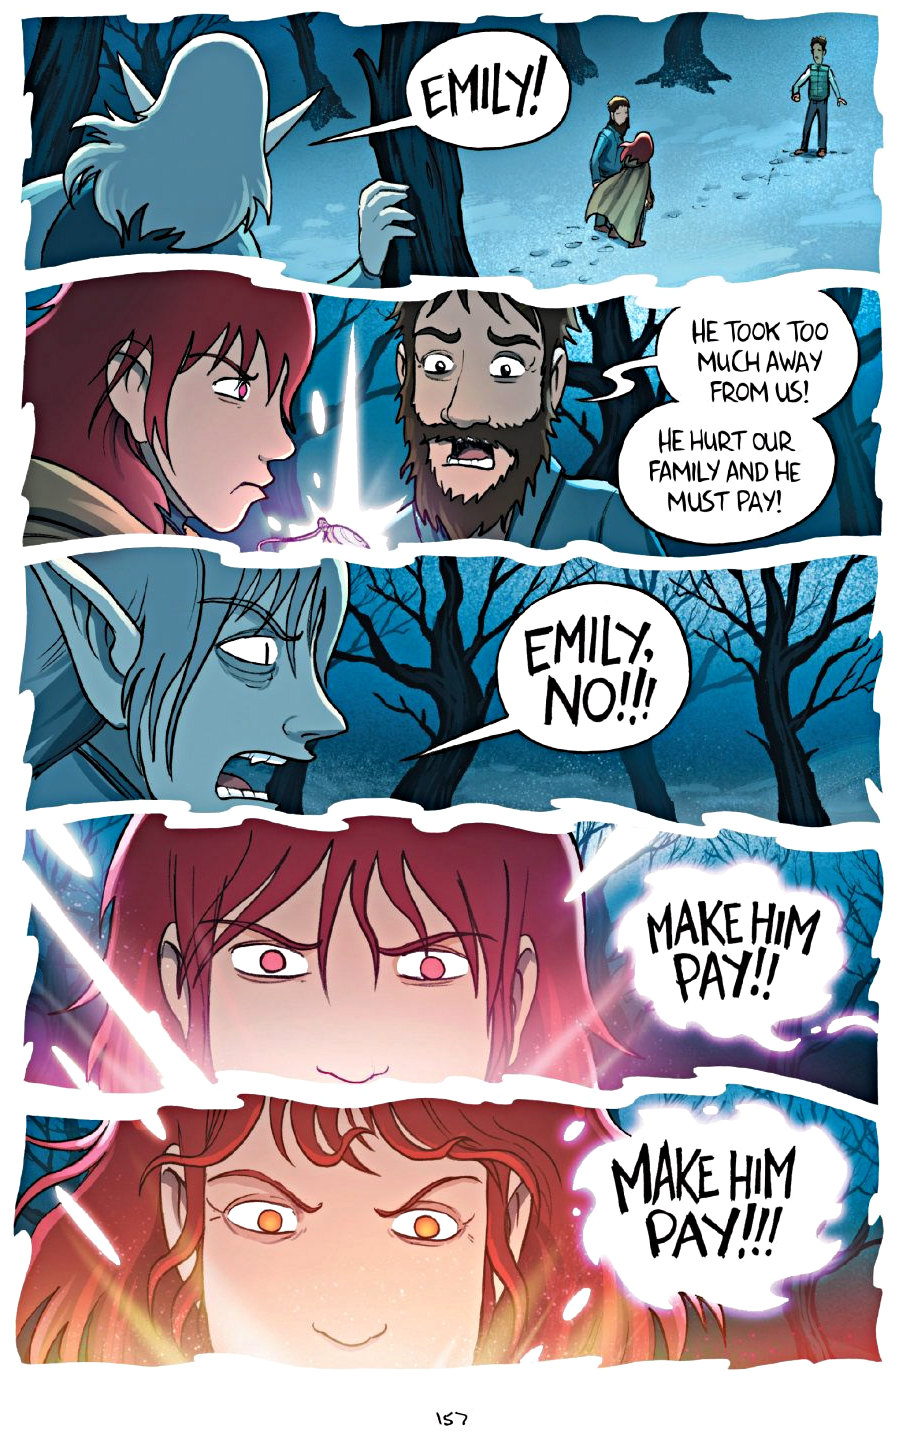 page 157 of amulet 7 firelight graphic novel